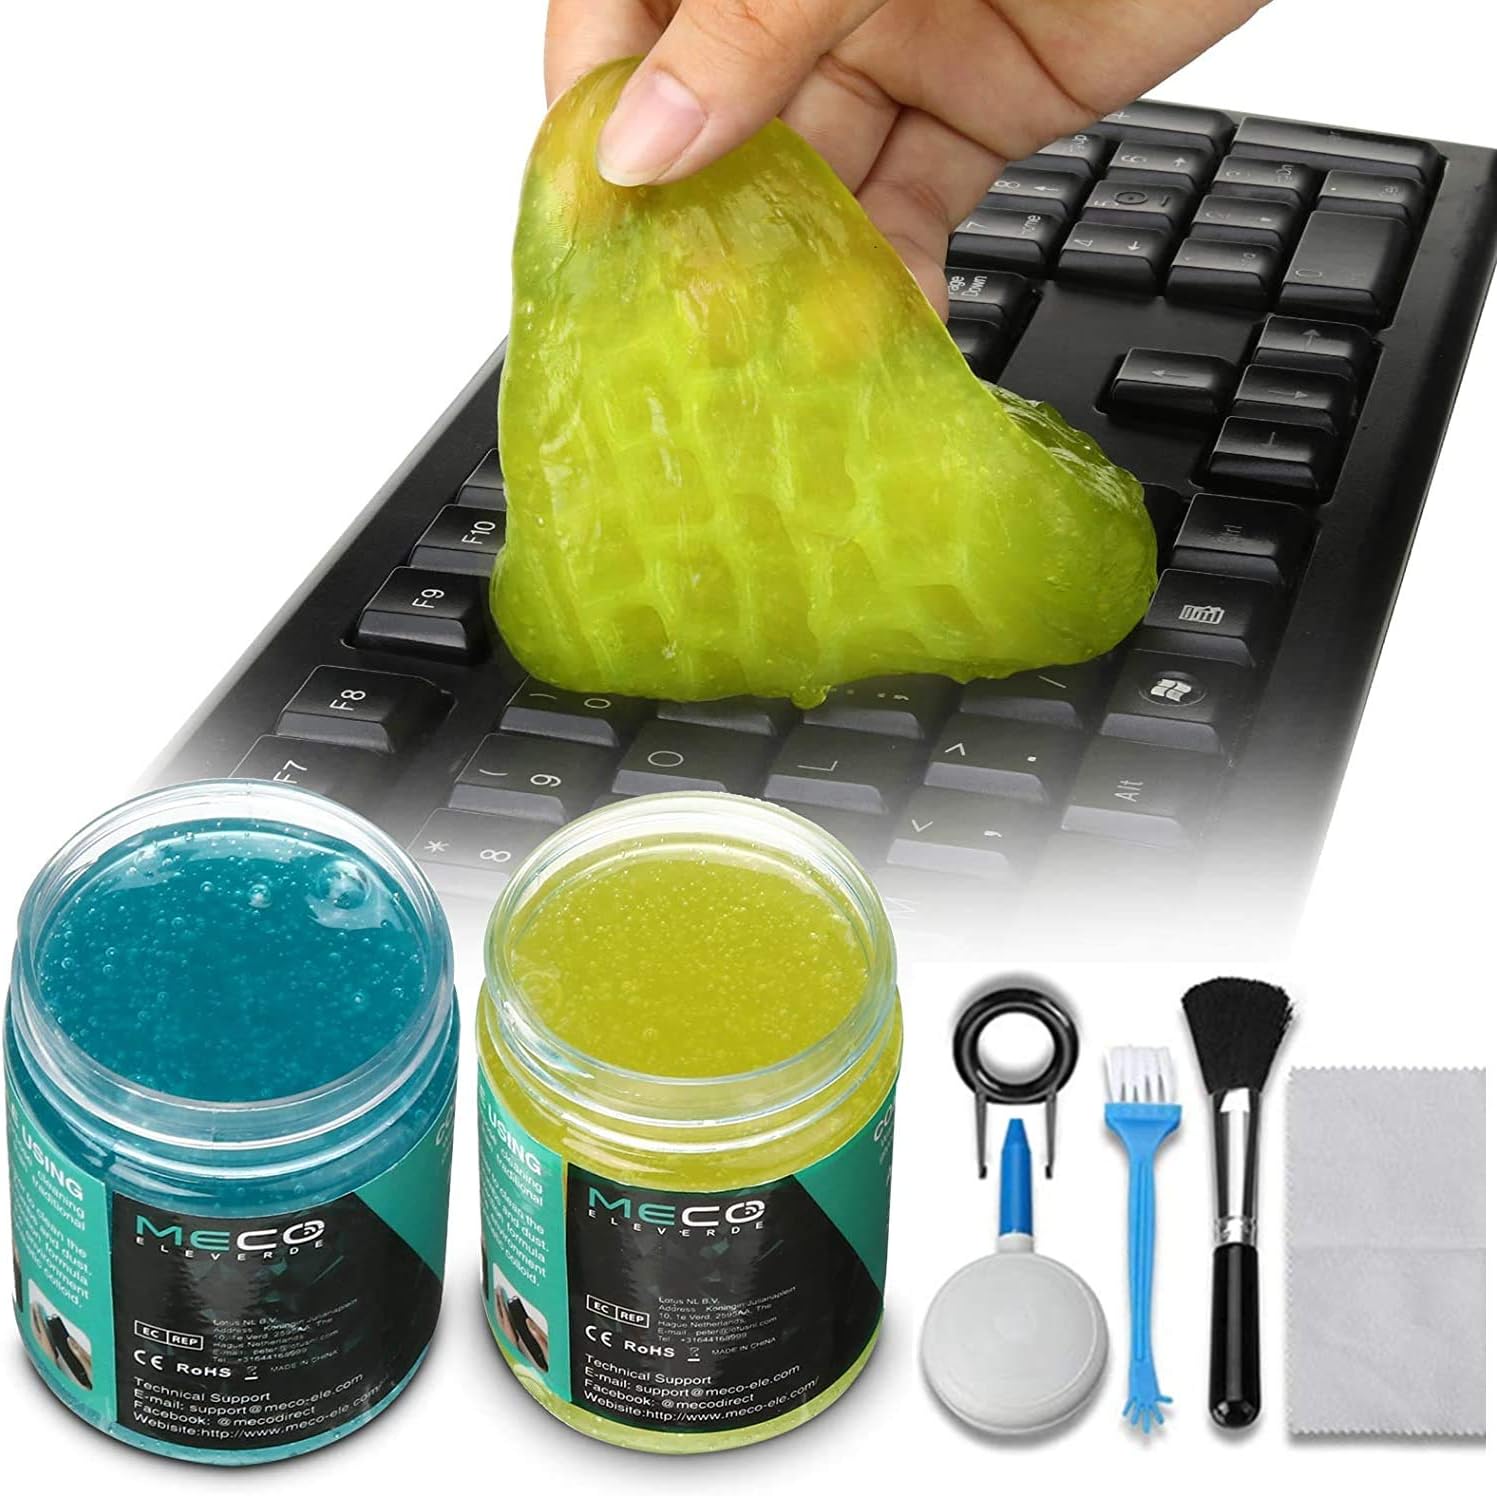 ME-A3 Cleaning Gel,  Universal Keyboard Cleaning Set 2 box